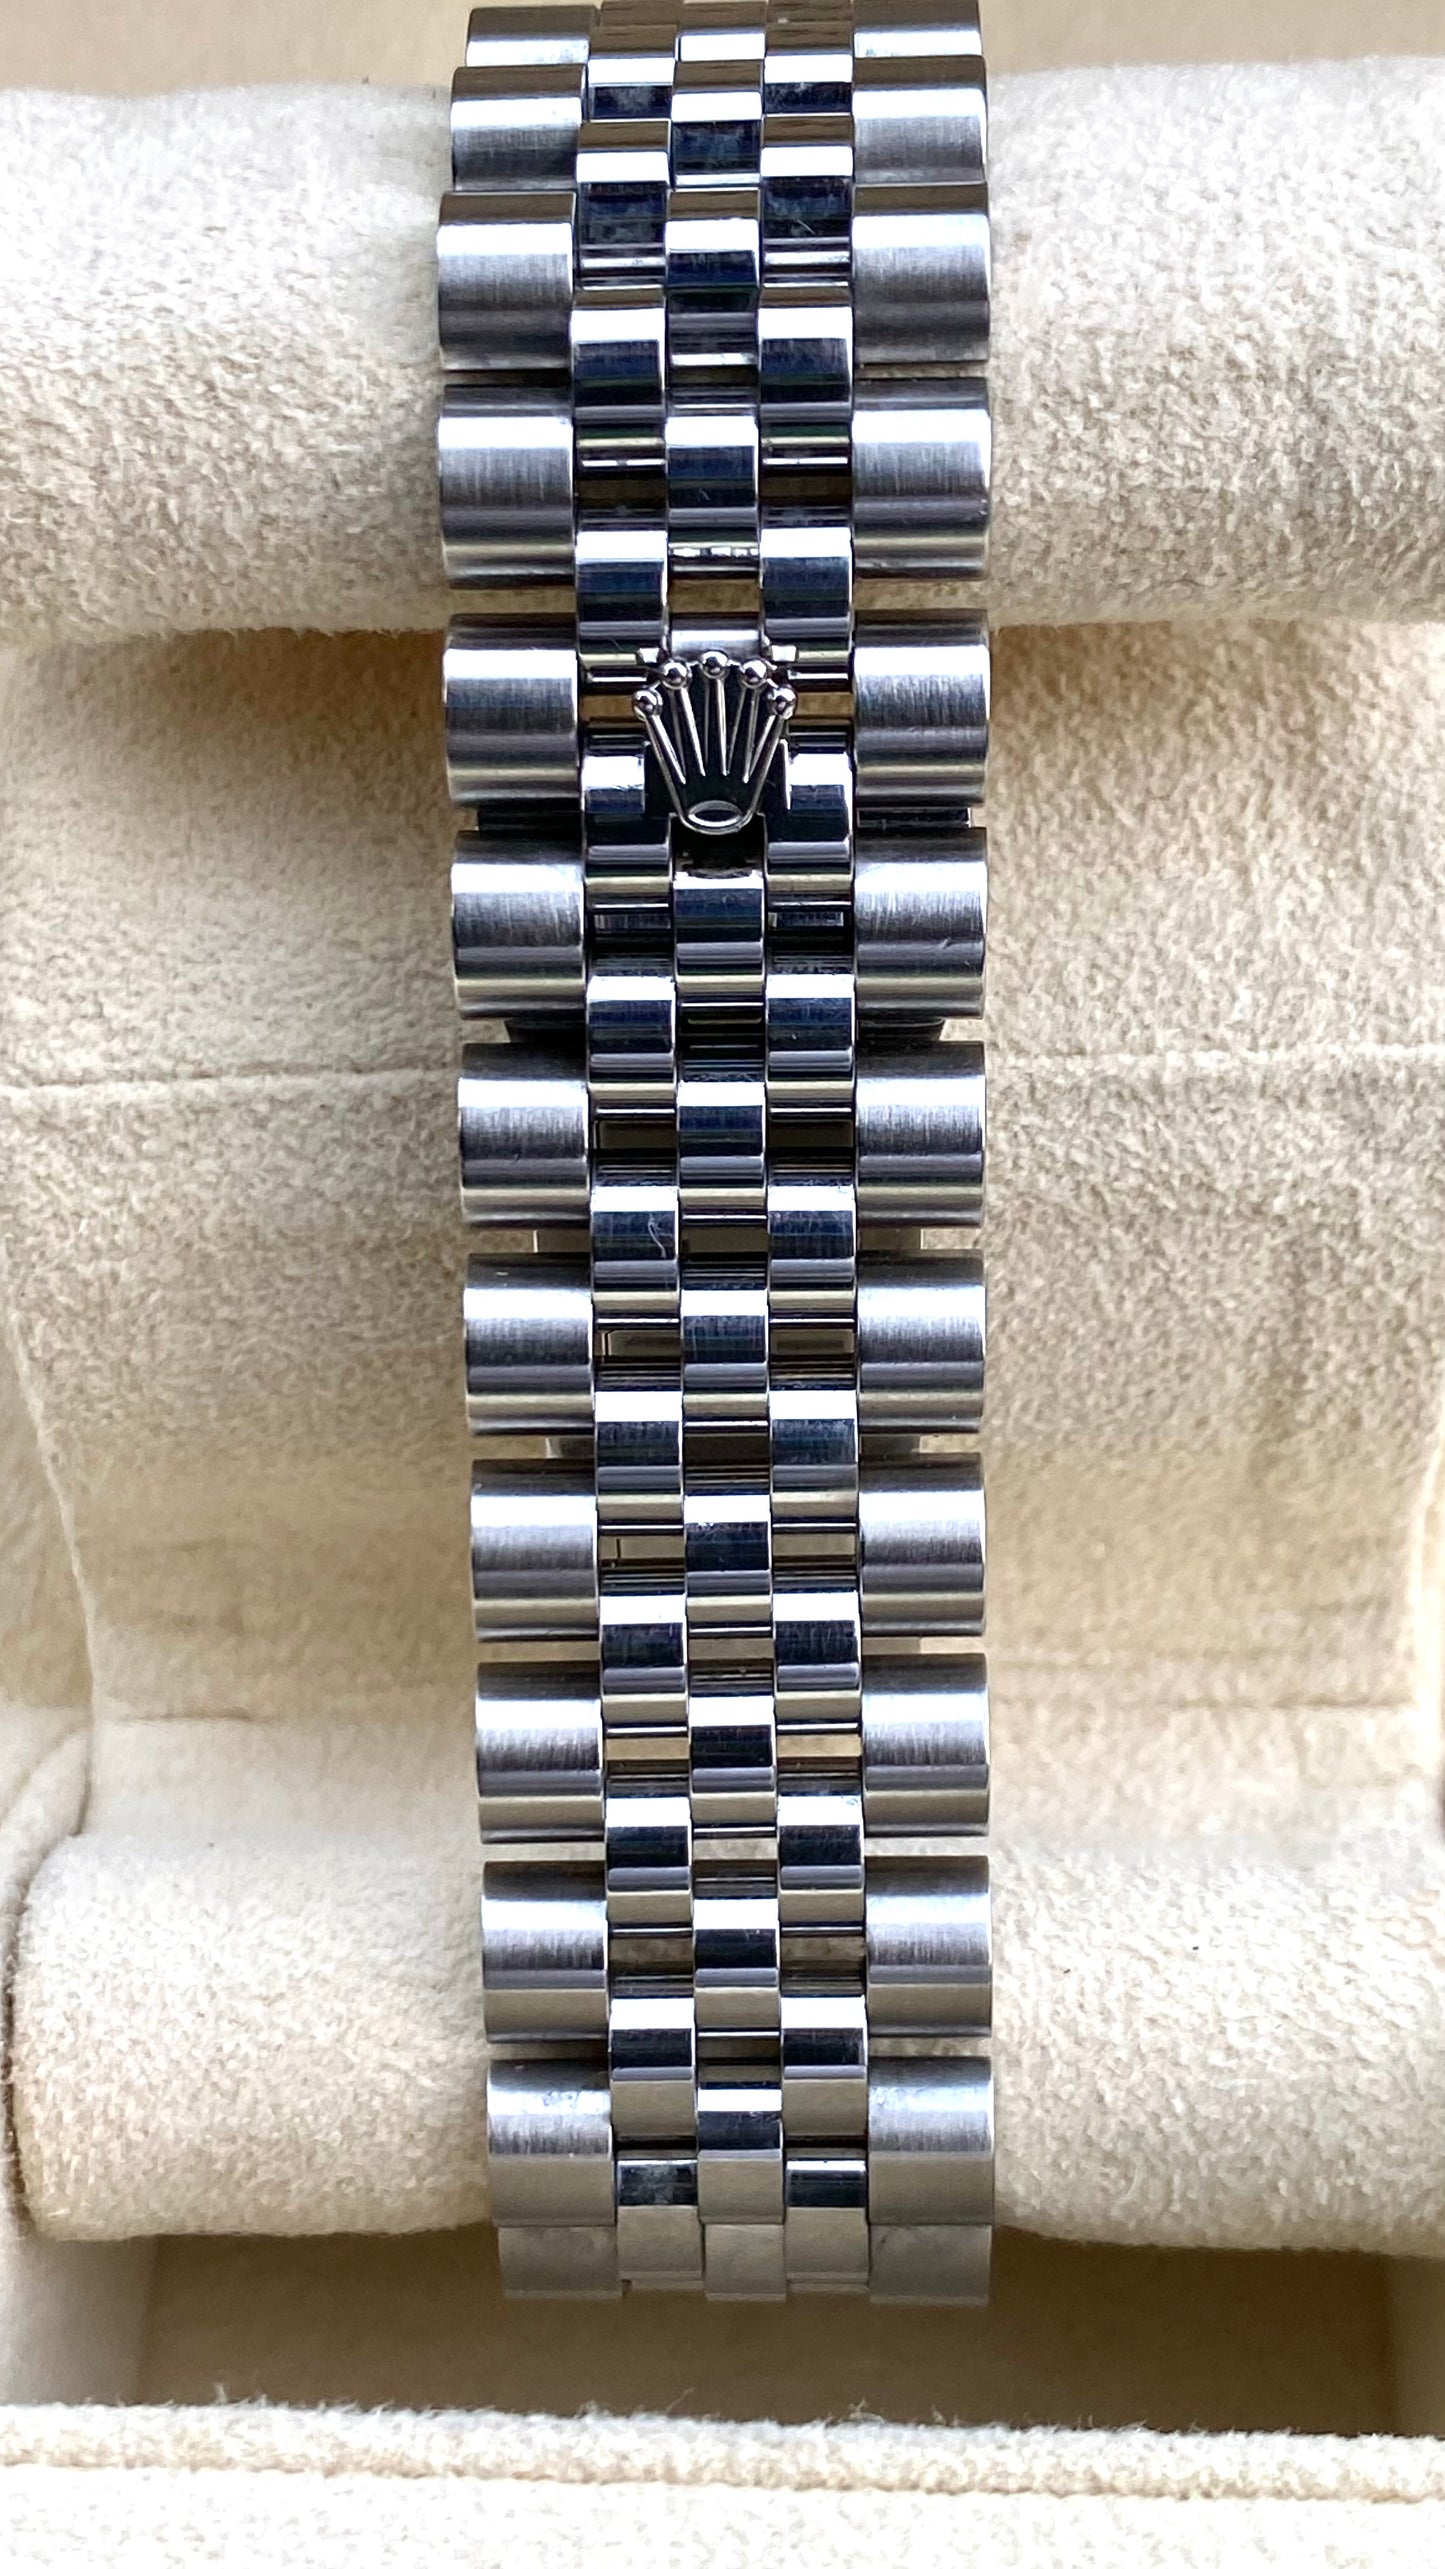 Datejust 116234 36mm (Pre-owned) (Preorder)